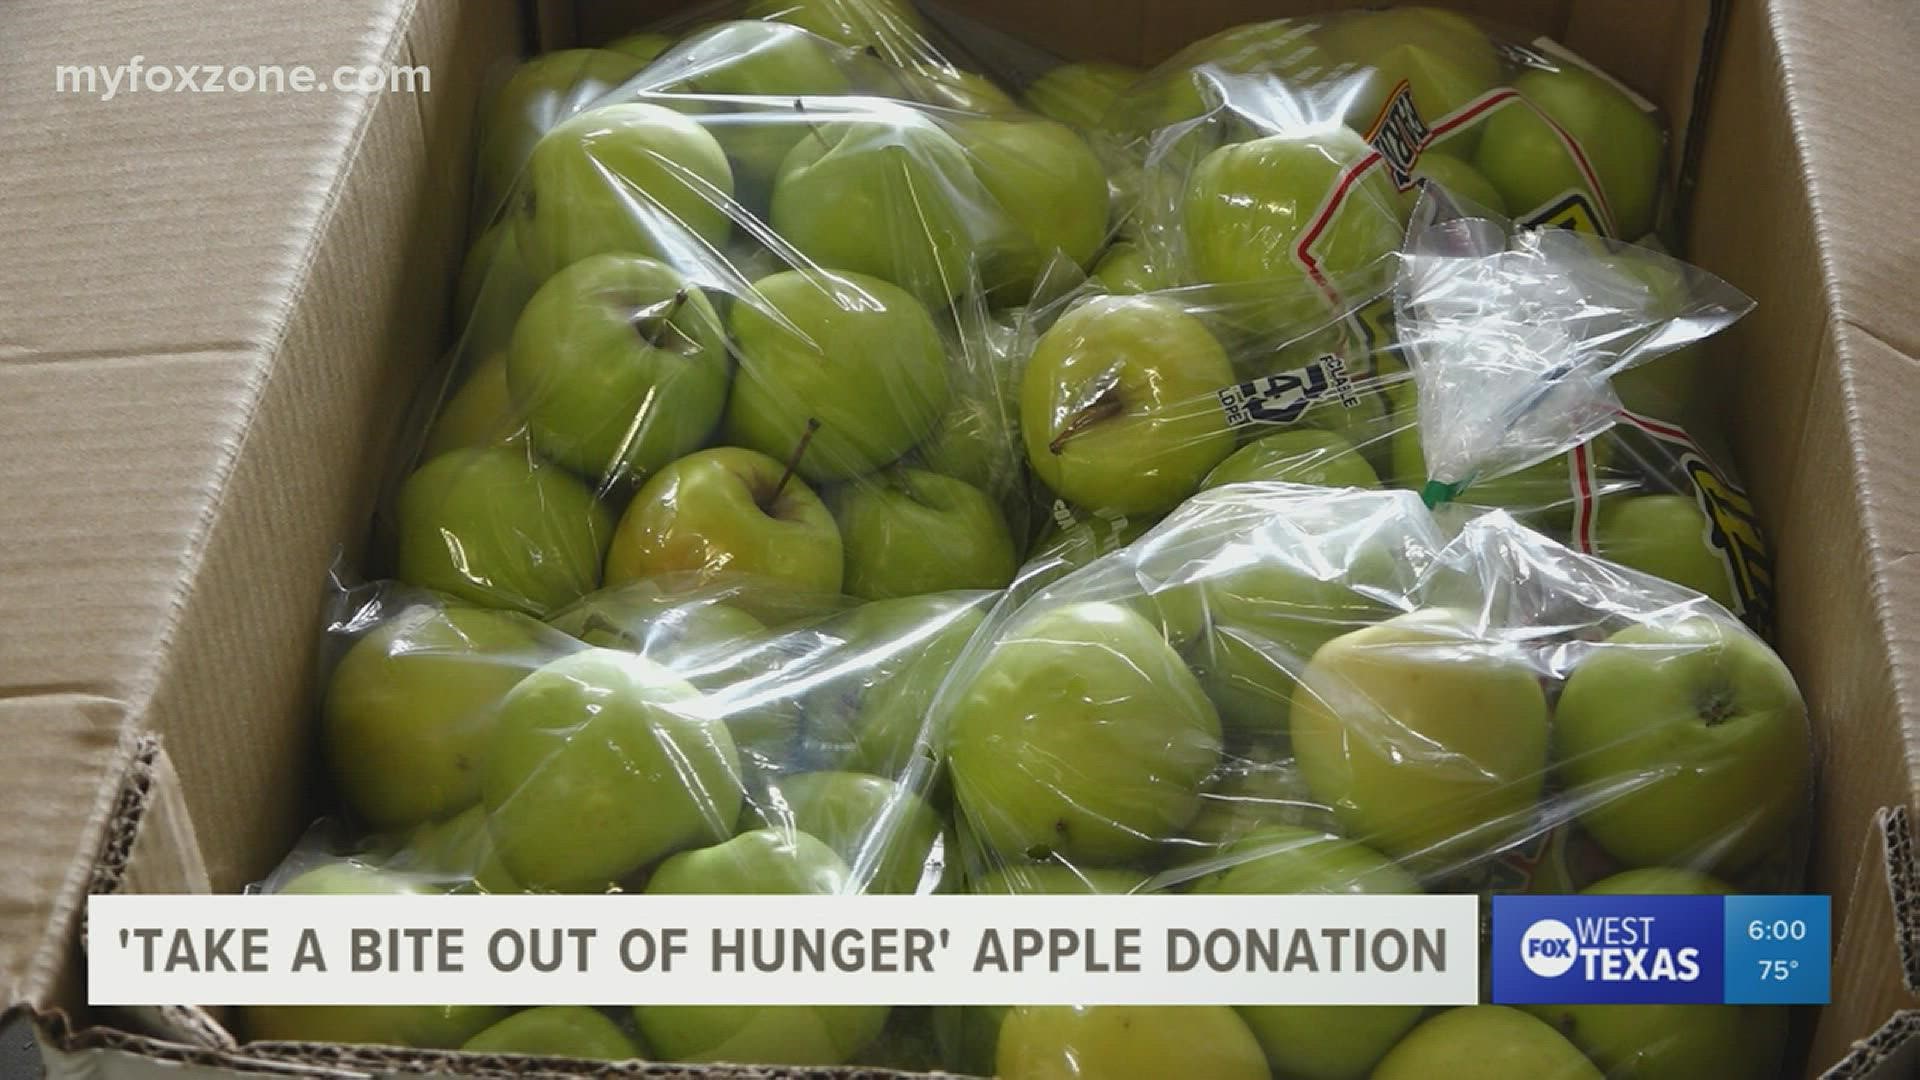 As part of the "FirstFruits program" United Supermarkets and Market Street will donate 50,000 lbs. of apples across Texas and New Mexico.